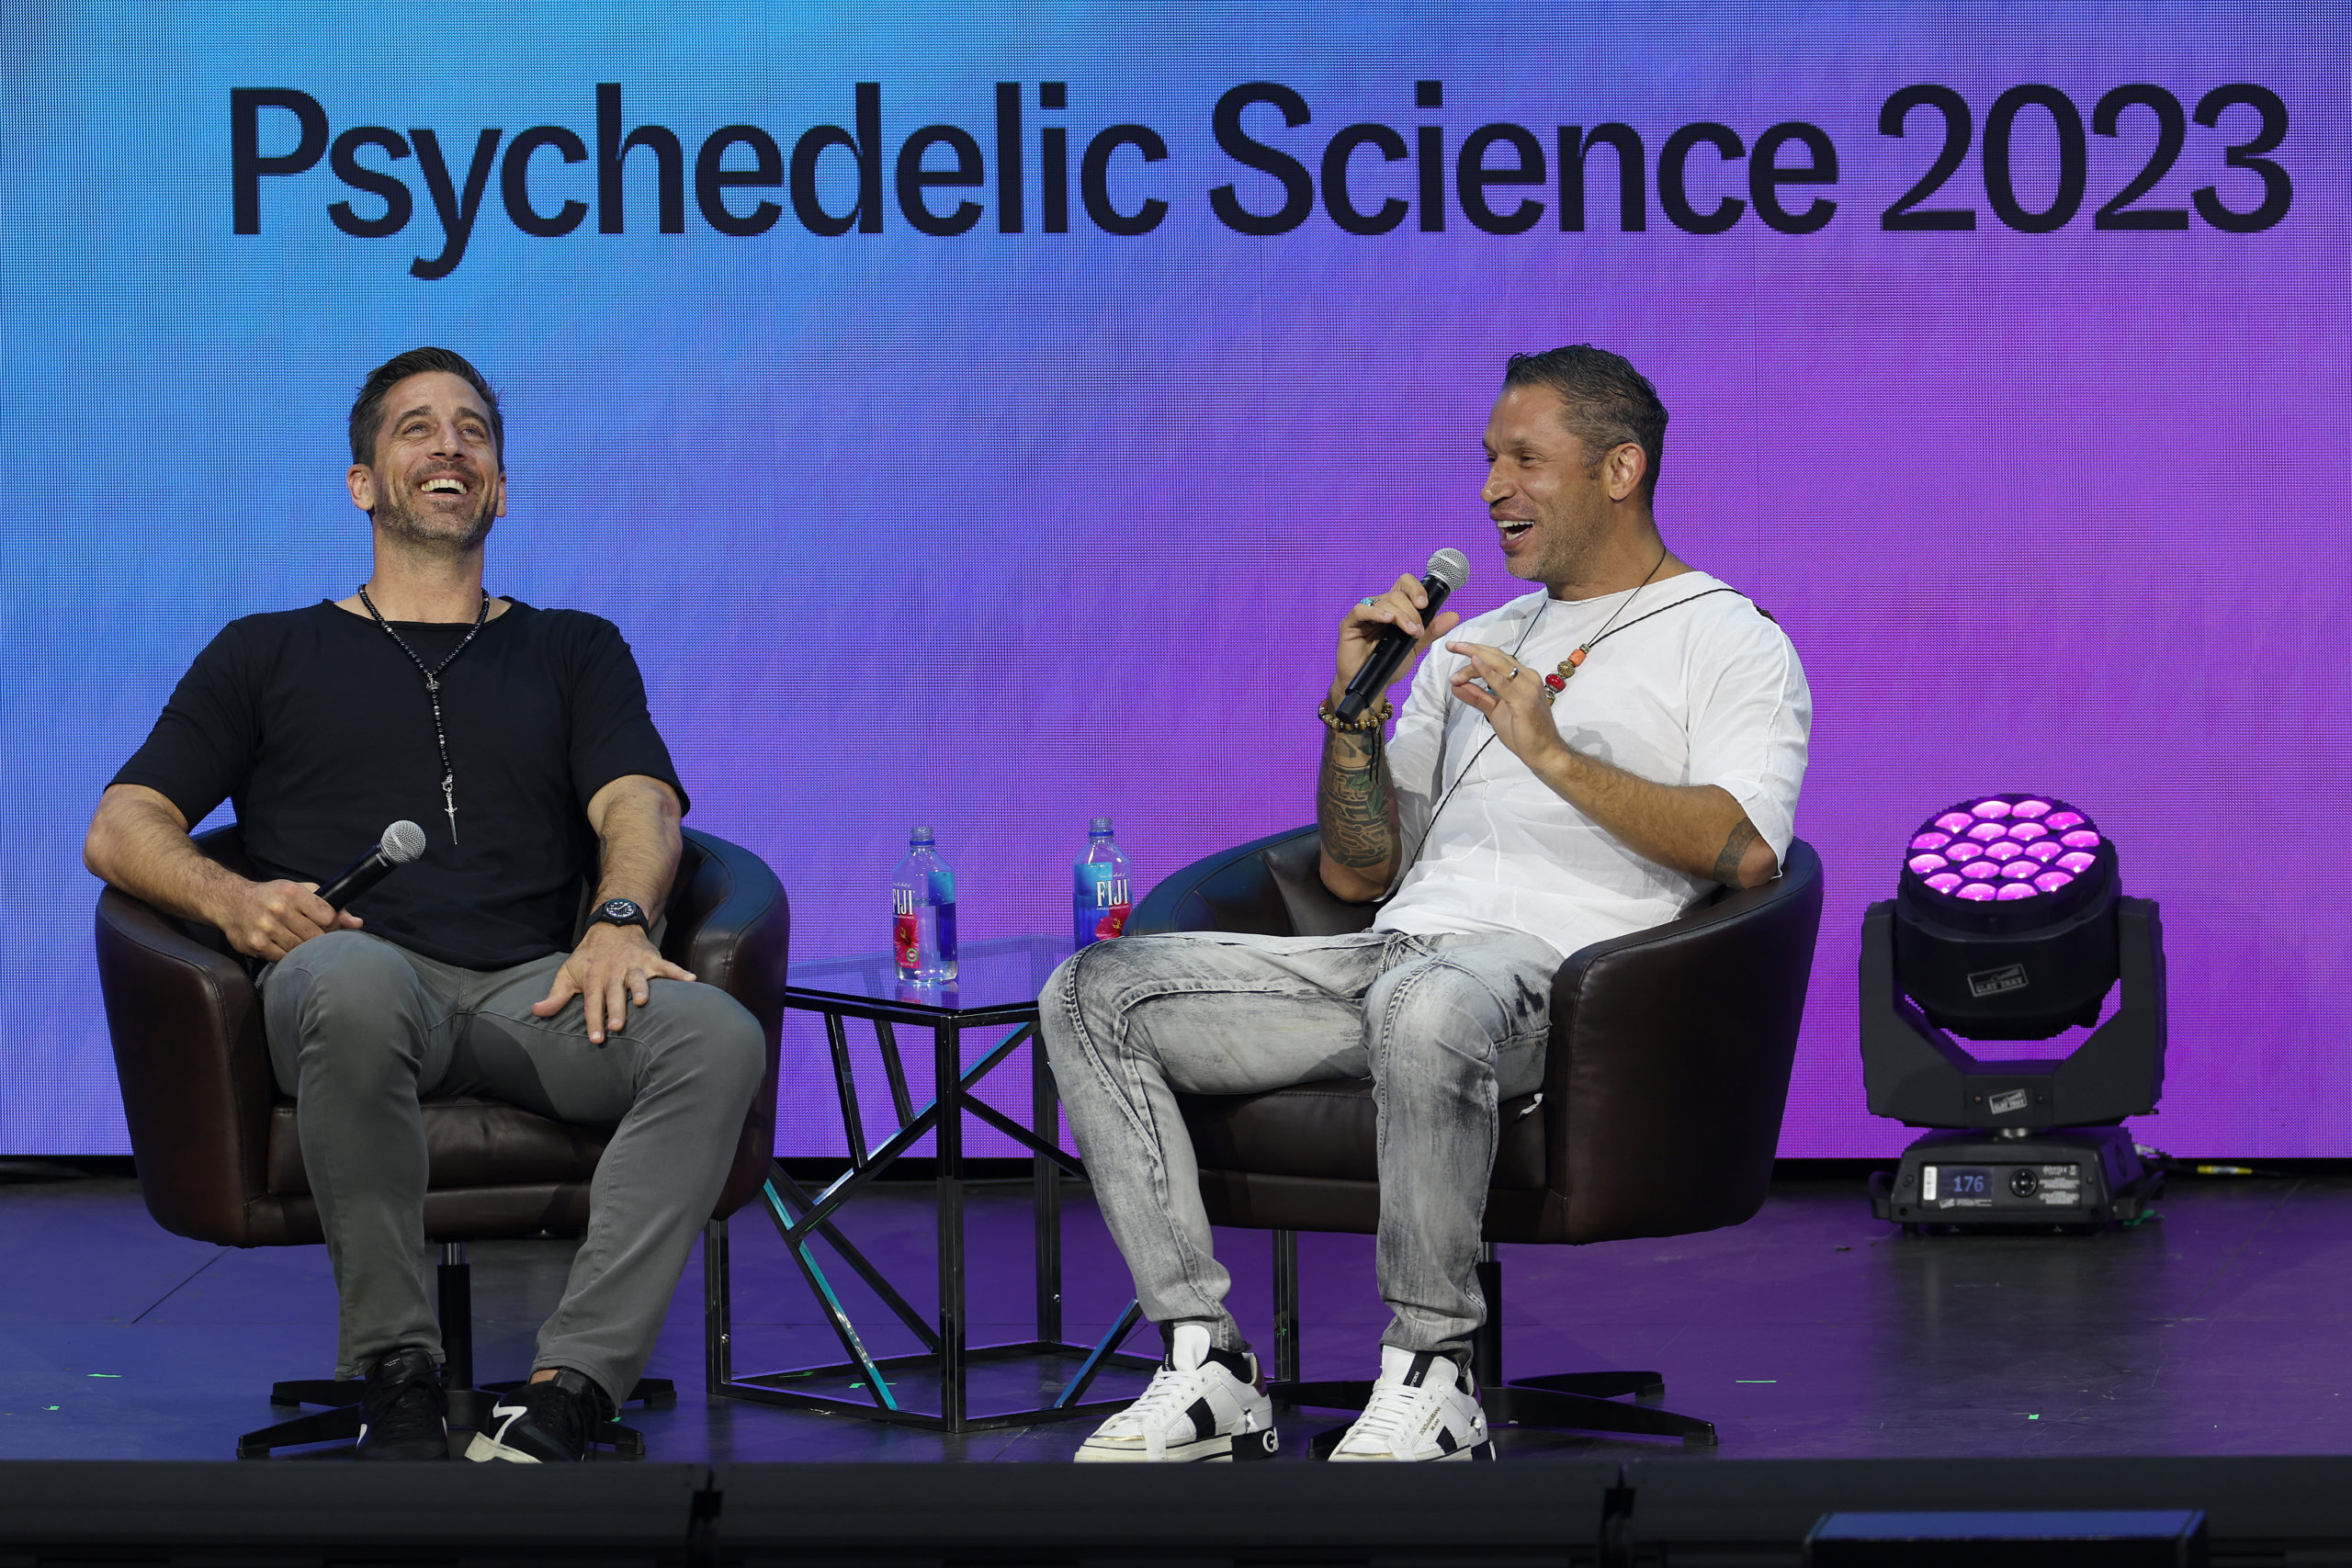 DENVER, COLORADO - JUNE 21: NFL Quarterback Aaron Rodgers participates in a talk with author Aubrey Marcus as part of Psychedelic Science 2023 in the Bellcor Theatre of the Colorado Convention Center on June 21, 2023 in Denver, Colorado. Matthew Stockman/Getty Images